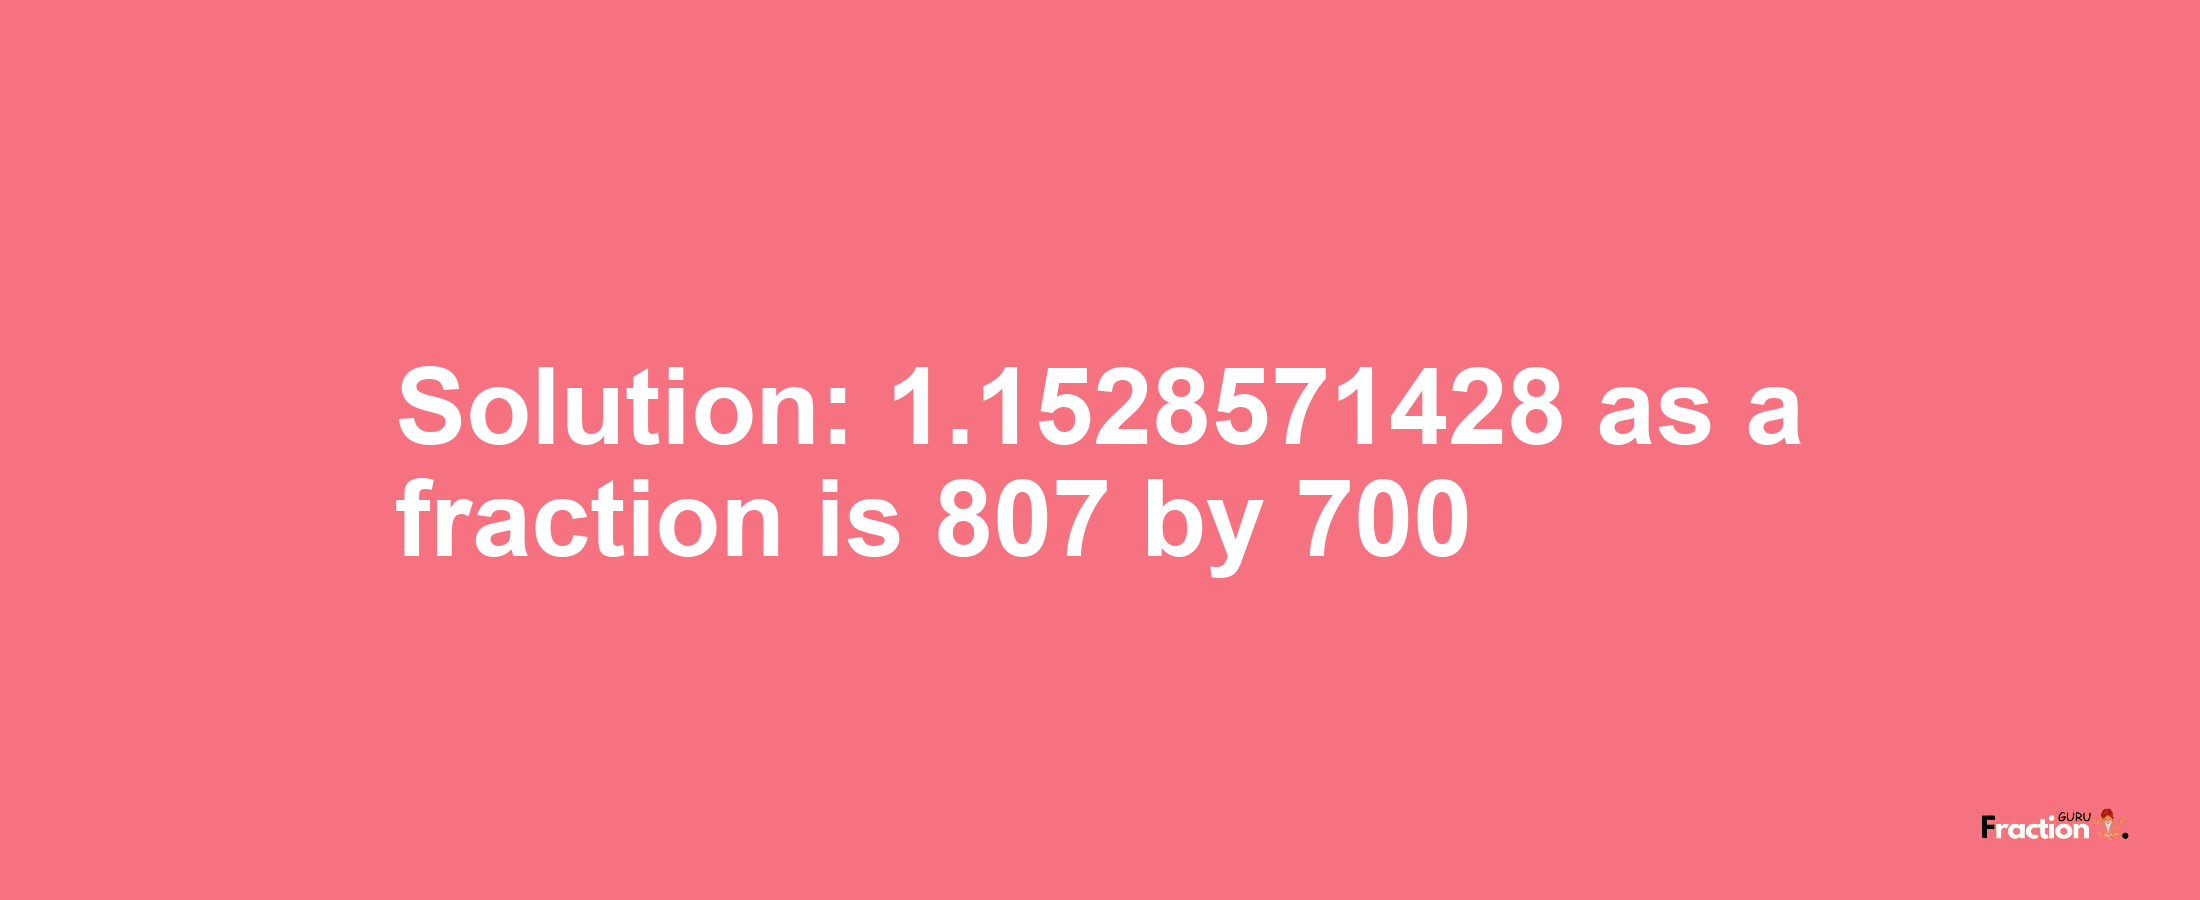 Solution:1.1528571428 as a fraction is 807/700